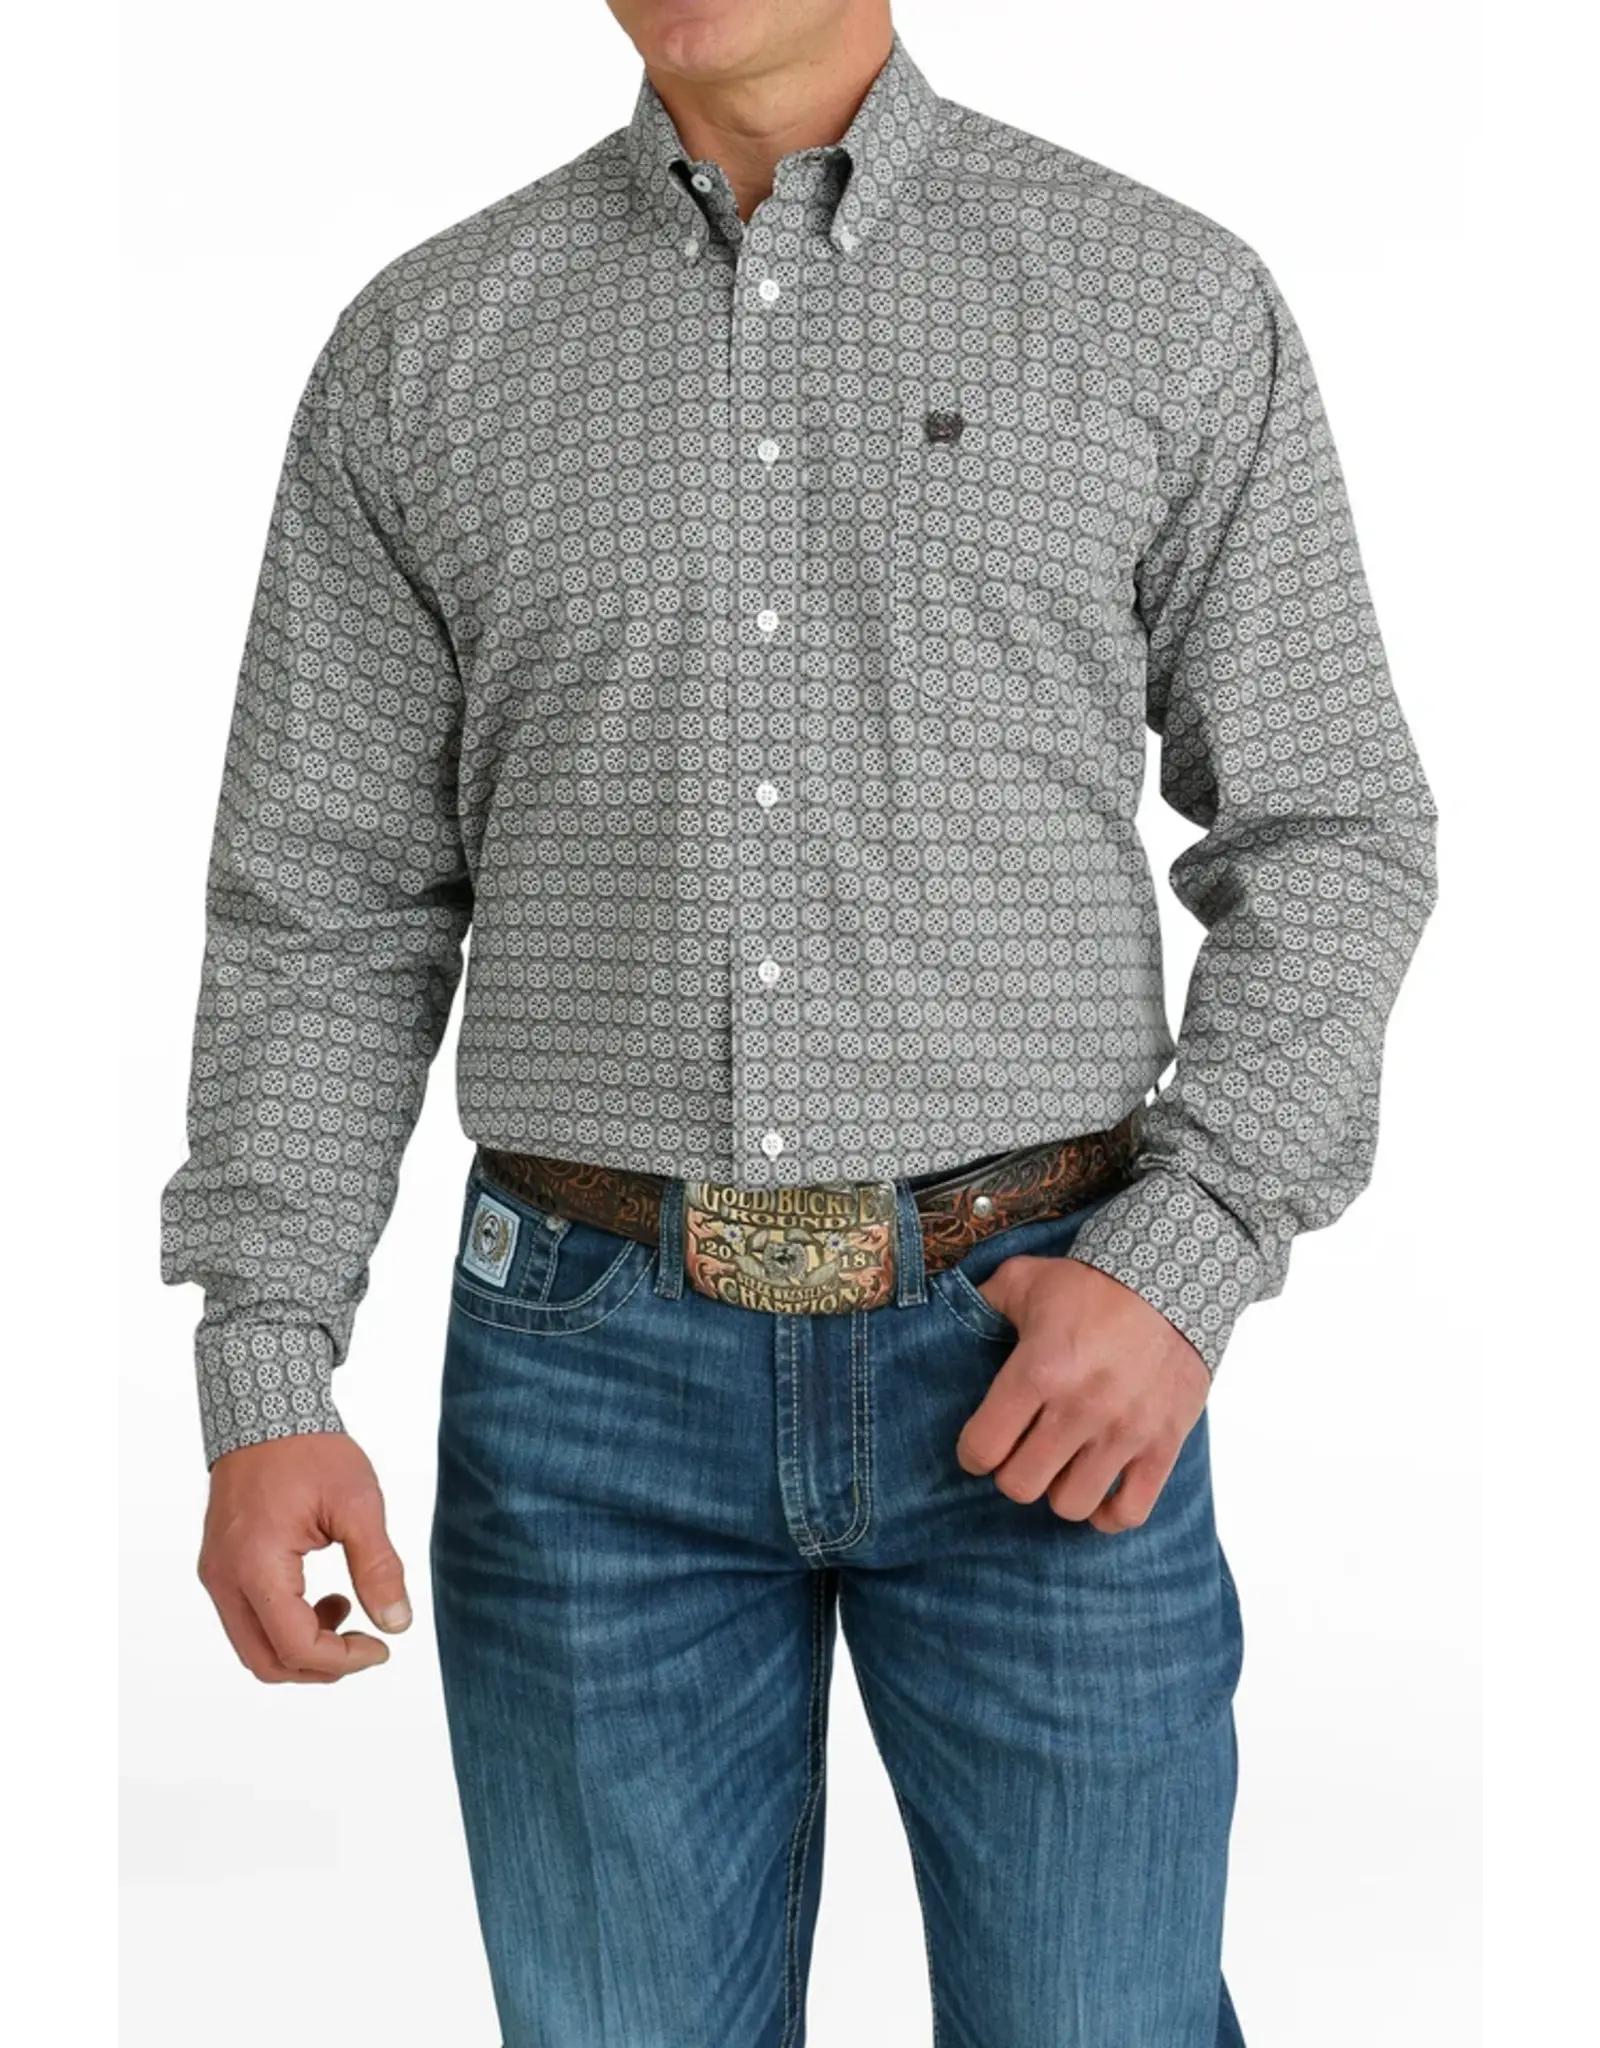 Cinch Mens Classic Fit Gray Print MTW1105647 WHT Long Sleeve Button Up Western Shirt